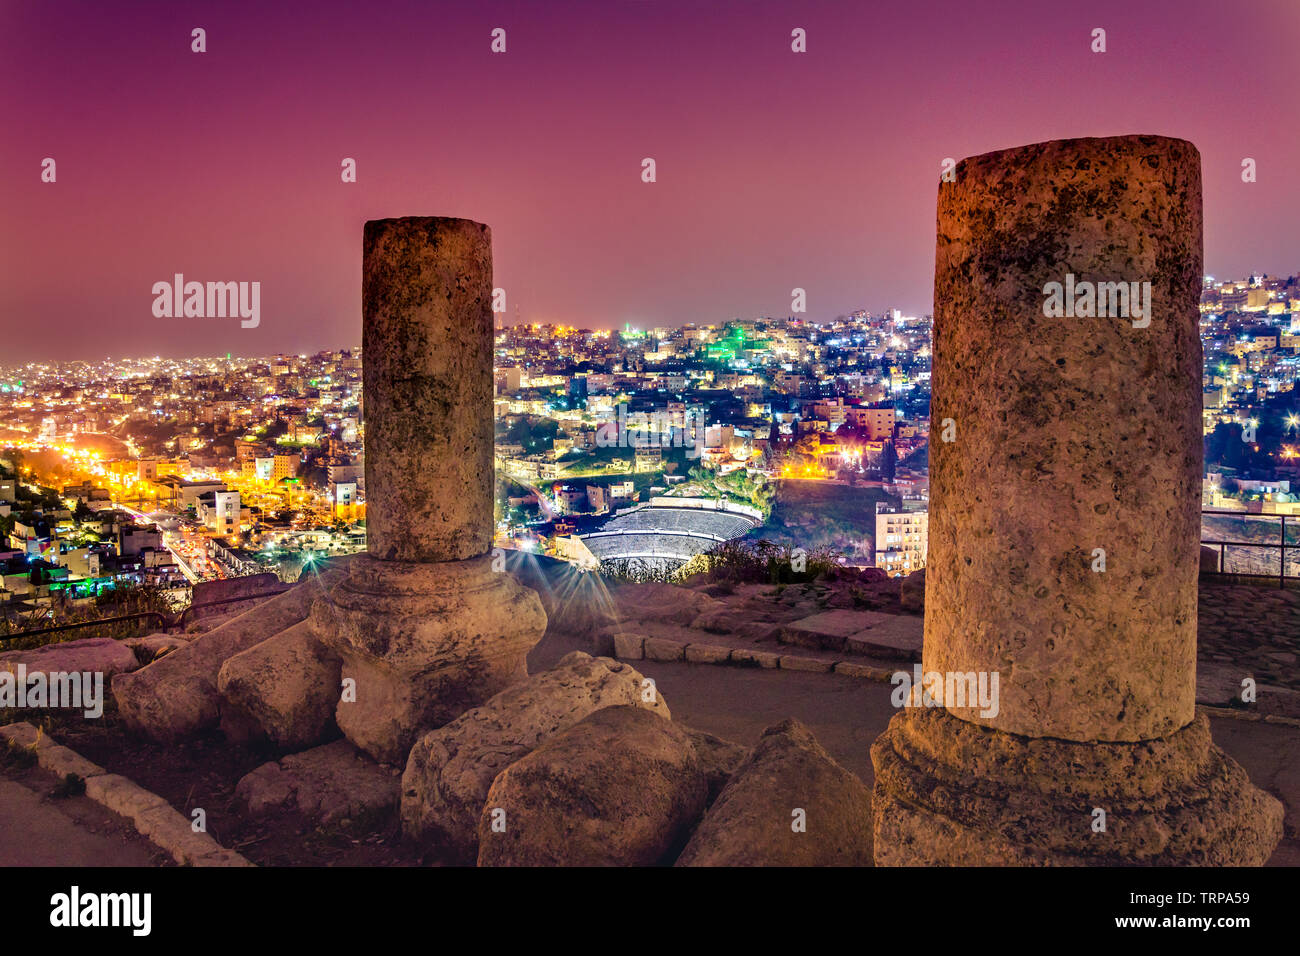 View of the Roman Theater and the city of Amman, Jordan Stock Photo